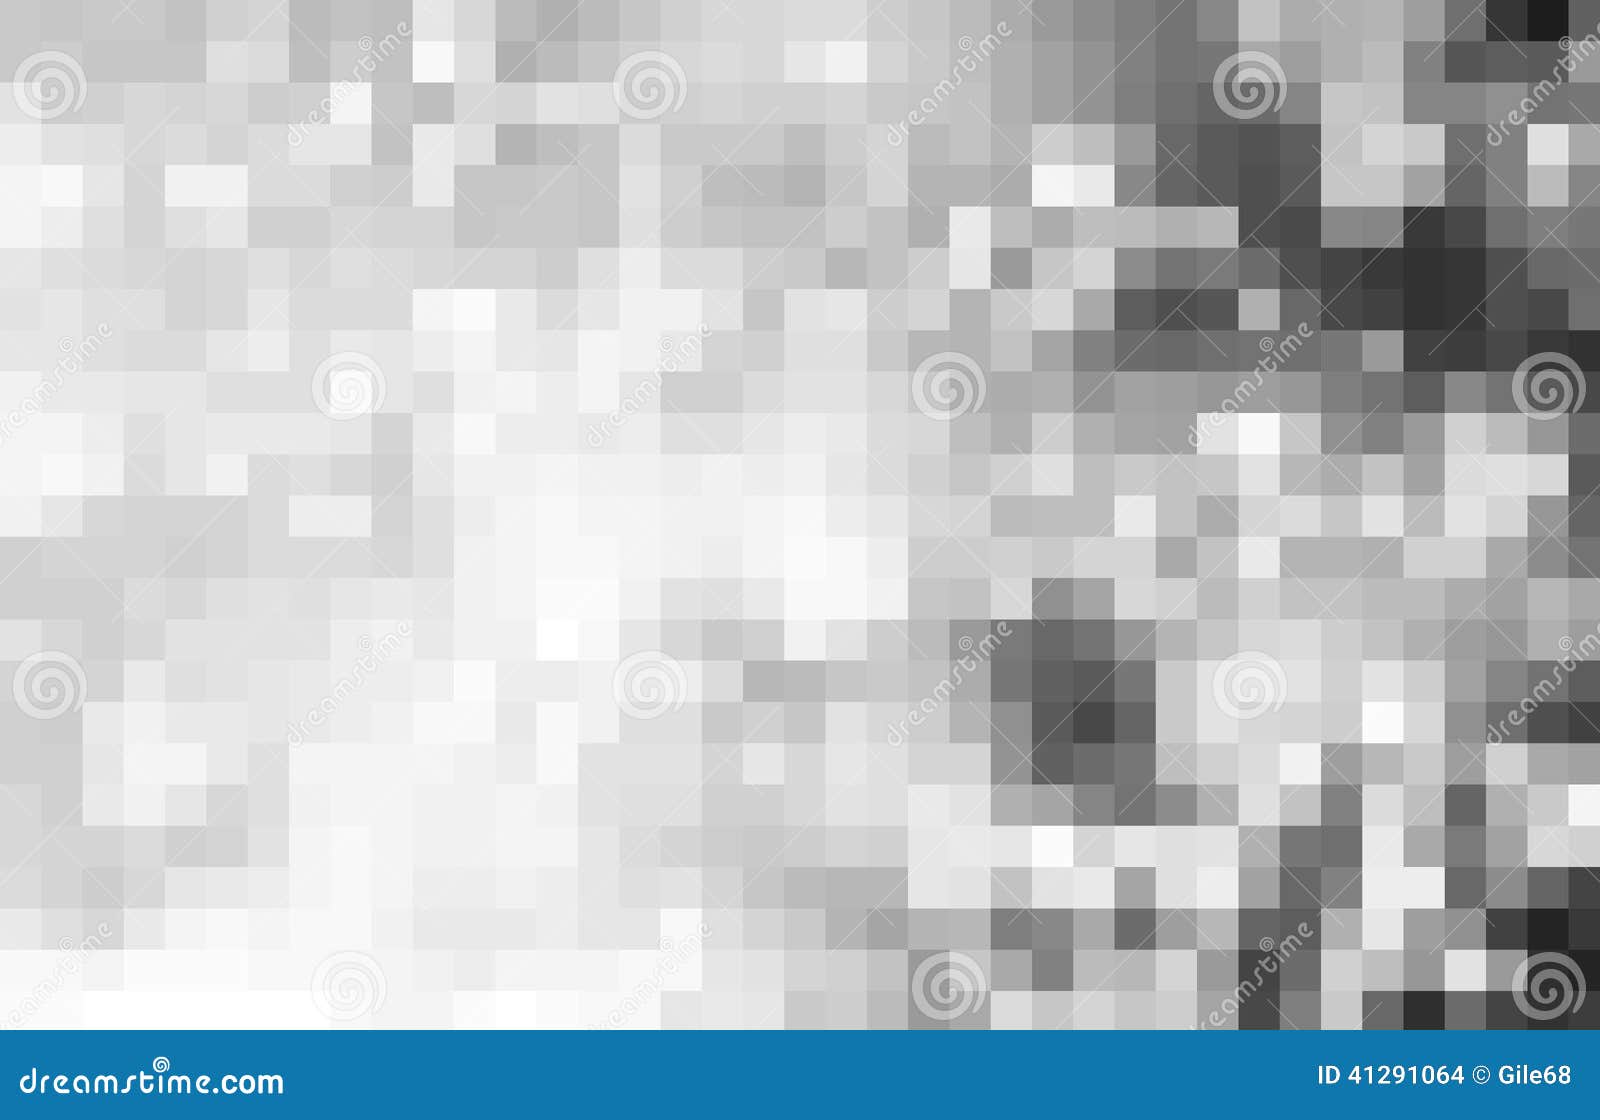 abstract gray pixel background